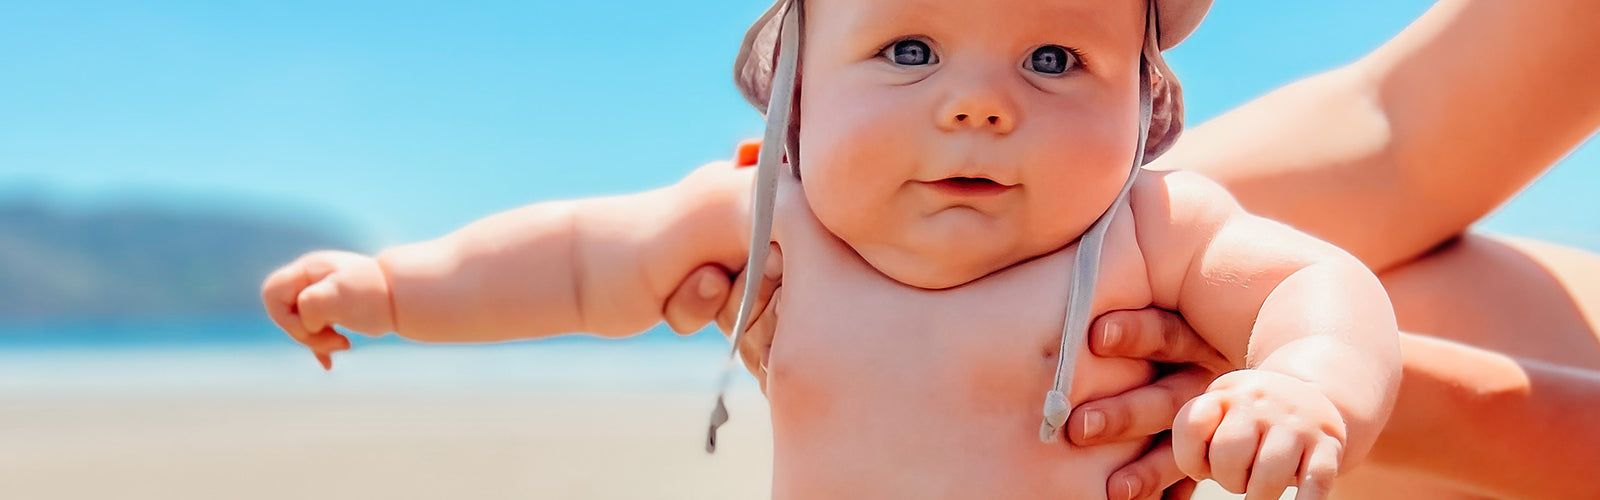 Baby beach essentials, gear & tips - Beach time with baby